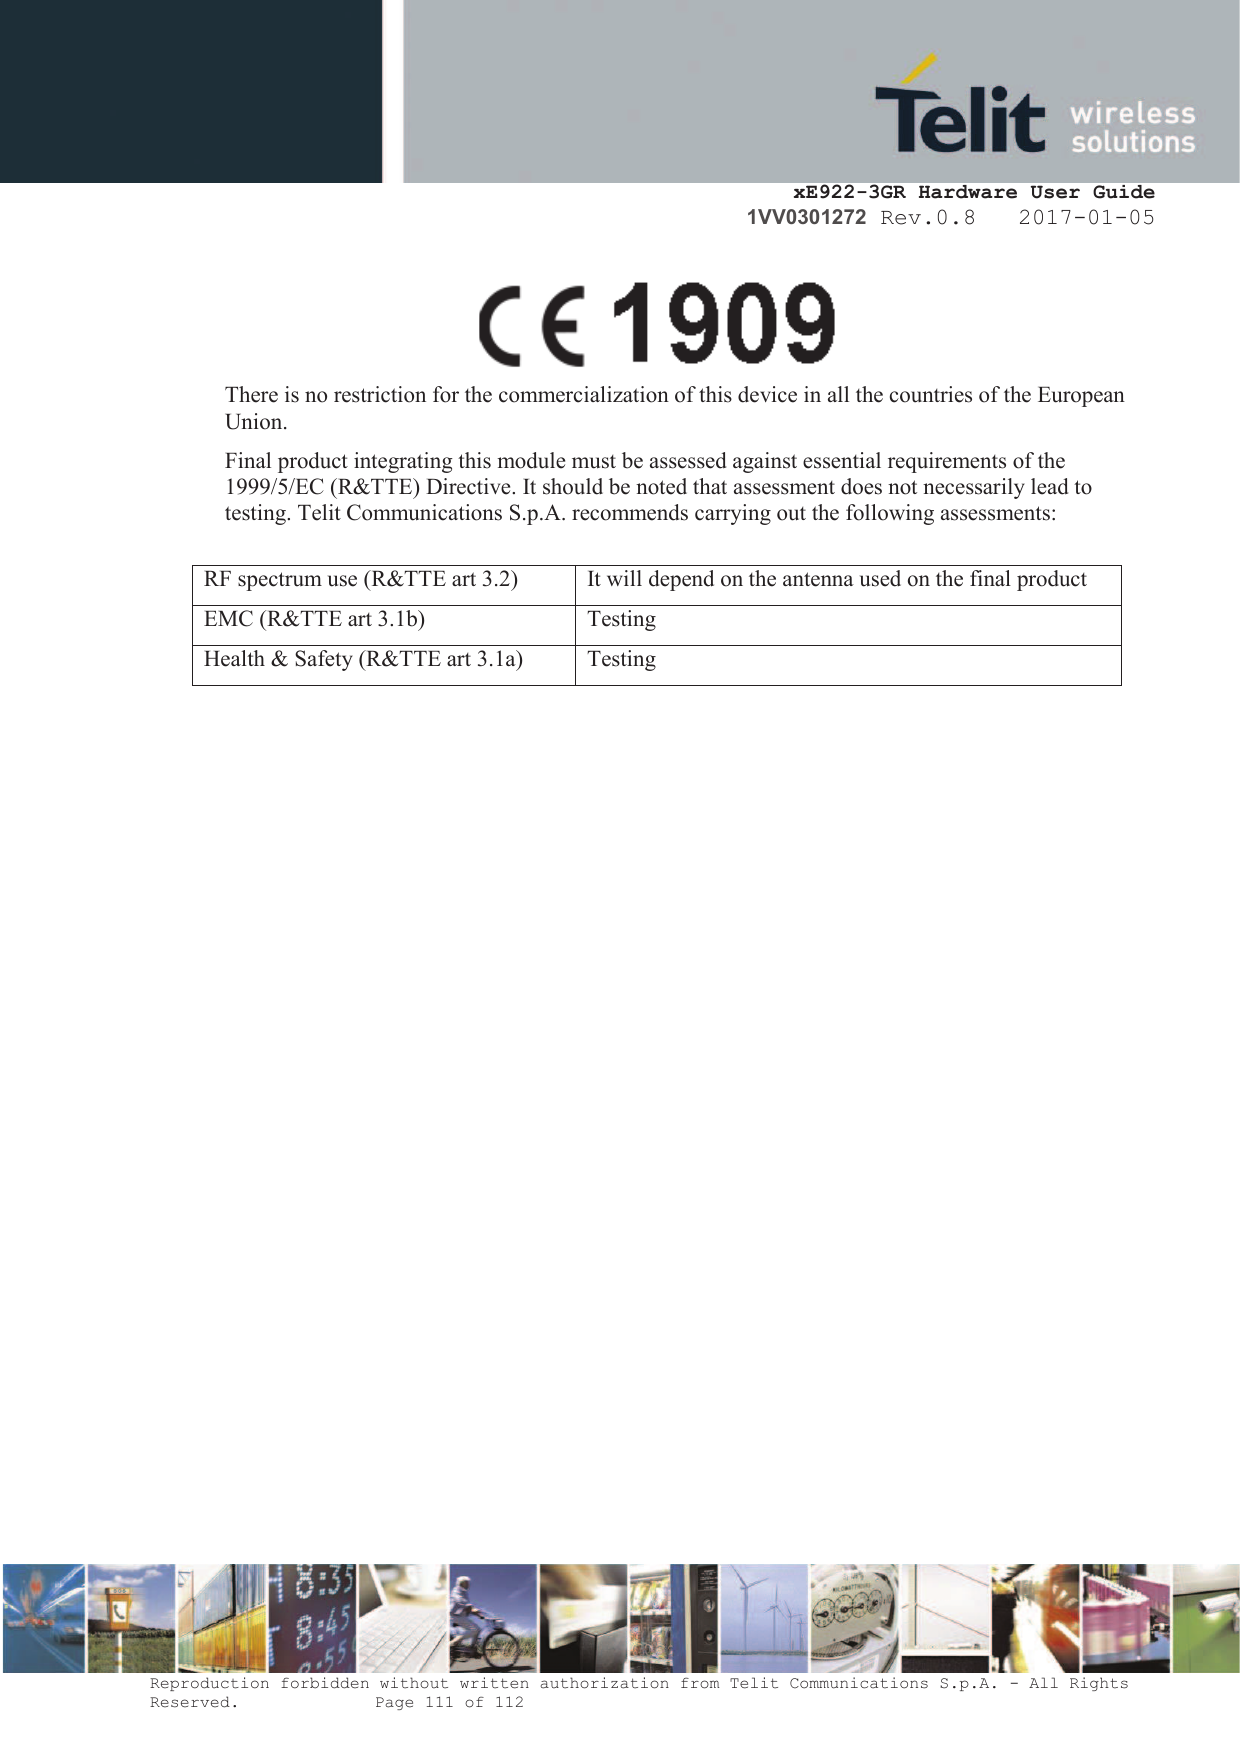     xE922-3GR Hardware User Guide 1VV0301272 Rev.0.8   2017-01-05 Reproduction forbidden without written authorization from Telit Communications S.p.A. - All Rights Reserved.    Page 111 of 112    There is no restriction for the commercialization of this device in all the countries of the European Union.  Final product integrating this module must be assessed against essential requirements of the 1999/5/EC (R&amp;TTE) Directive. It should be noted that assessment does not necessarily lead to testing. Telit Communications S.p.A. recommends carrying out the following assessments:  RF spectrum use (R&amp;TTE art 3.2) It will depend on the antenna used on the final product EMC (R&amp;TTE art 3.1b) Testing Health &amp; Safety (R&amp;TTE art 3.1a) Testing   